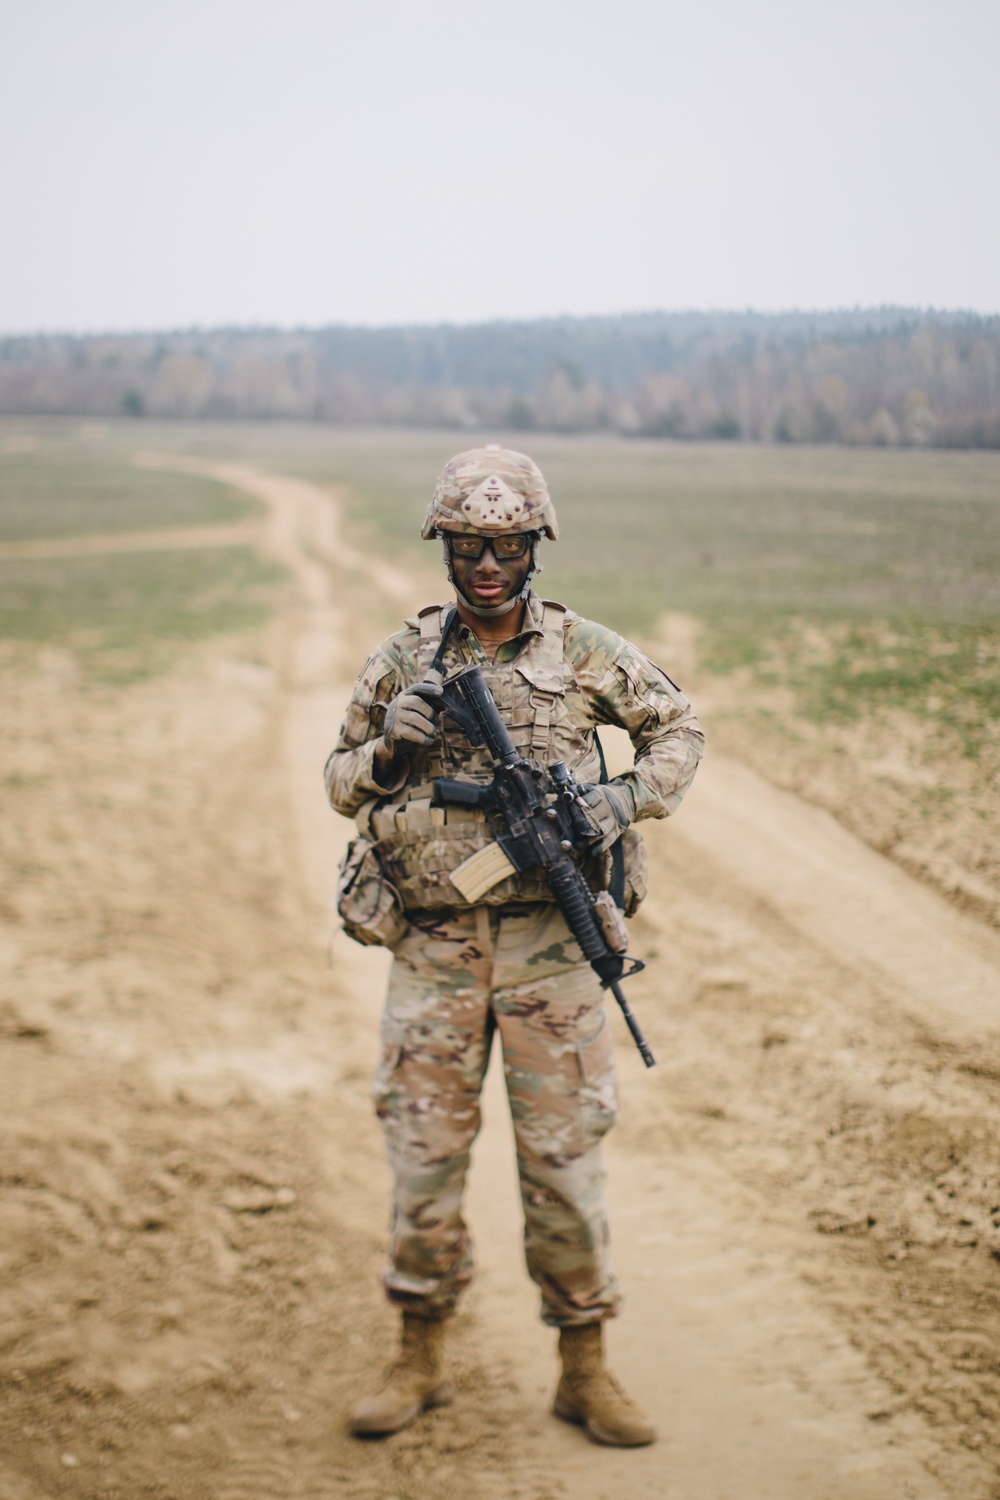 DVIDS Images U.S. Army paratrooper stands ready in Full Battle